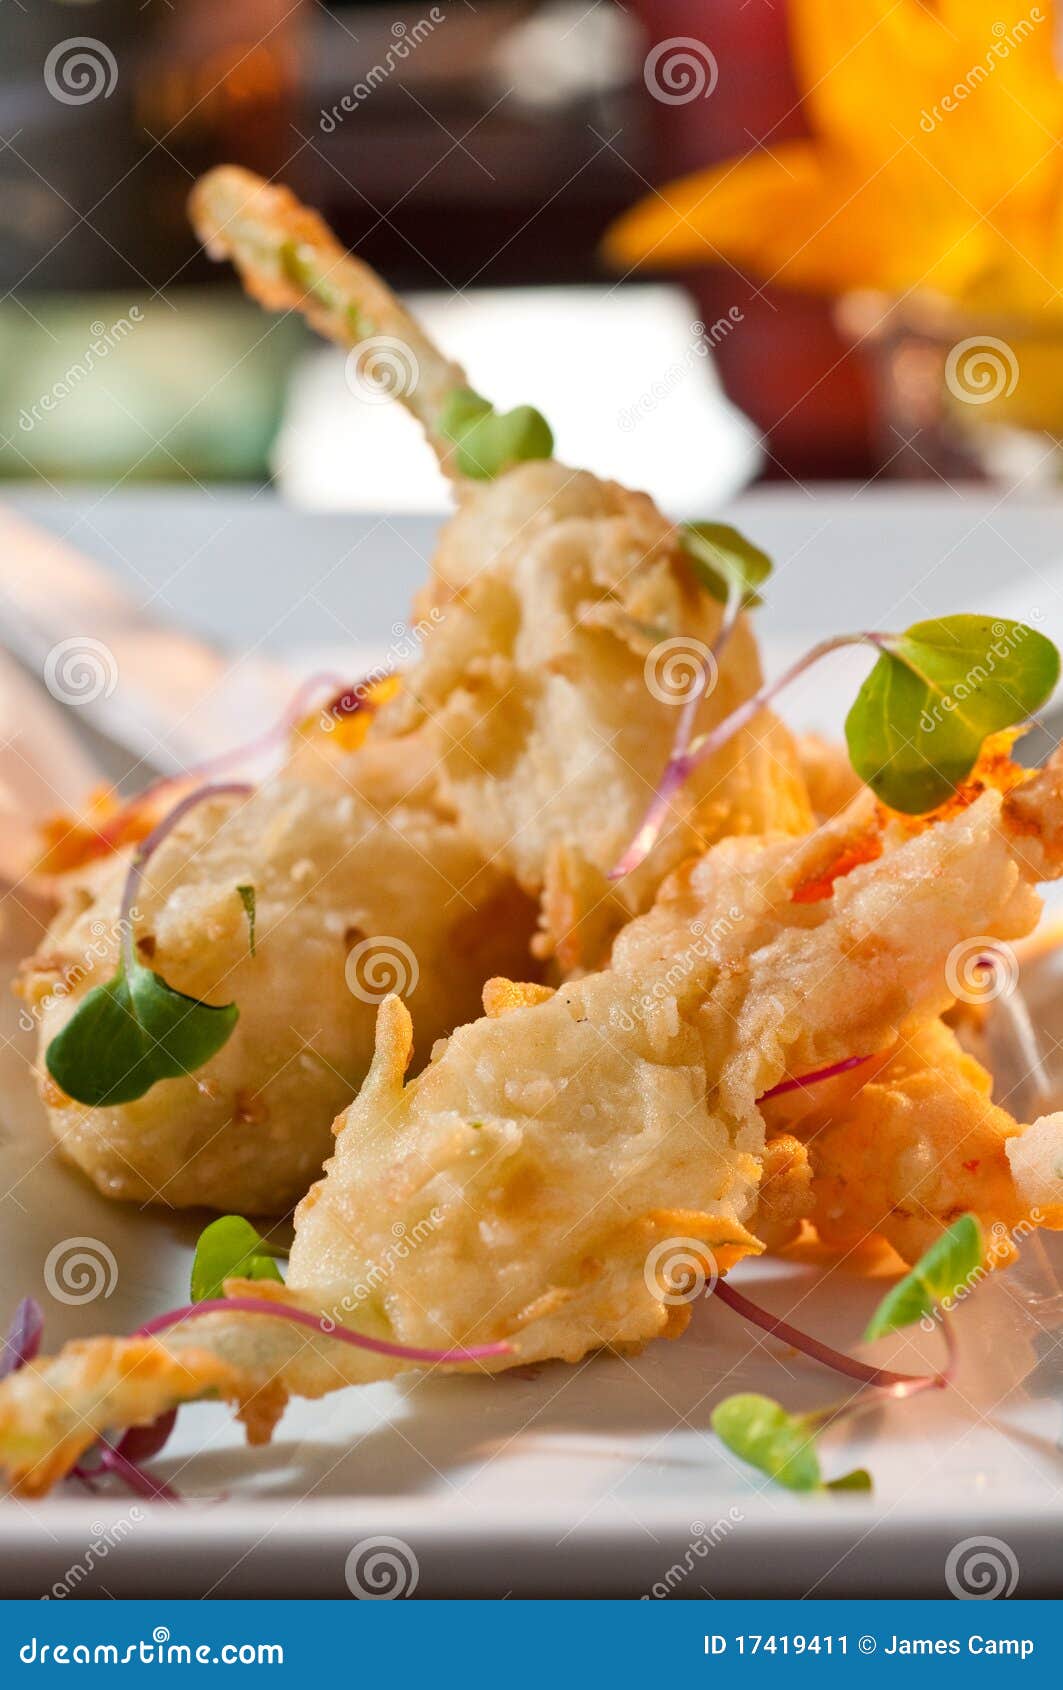 Stuffed squash blossoms stock image. Image of appetizer - 17419411